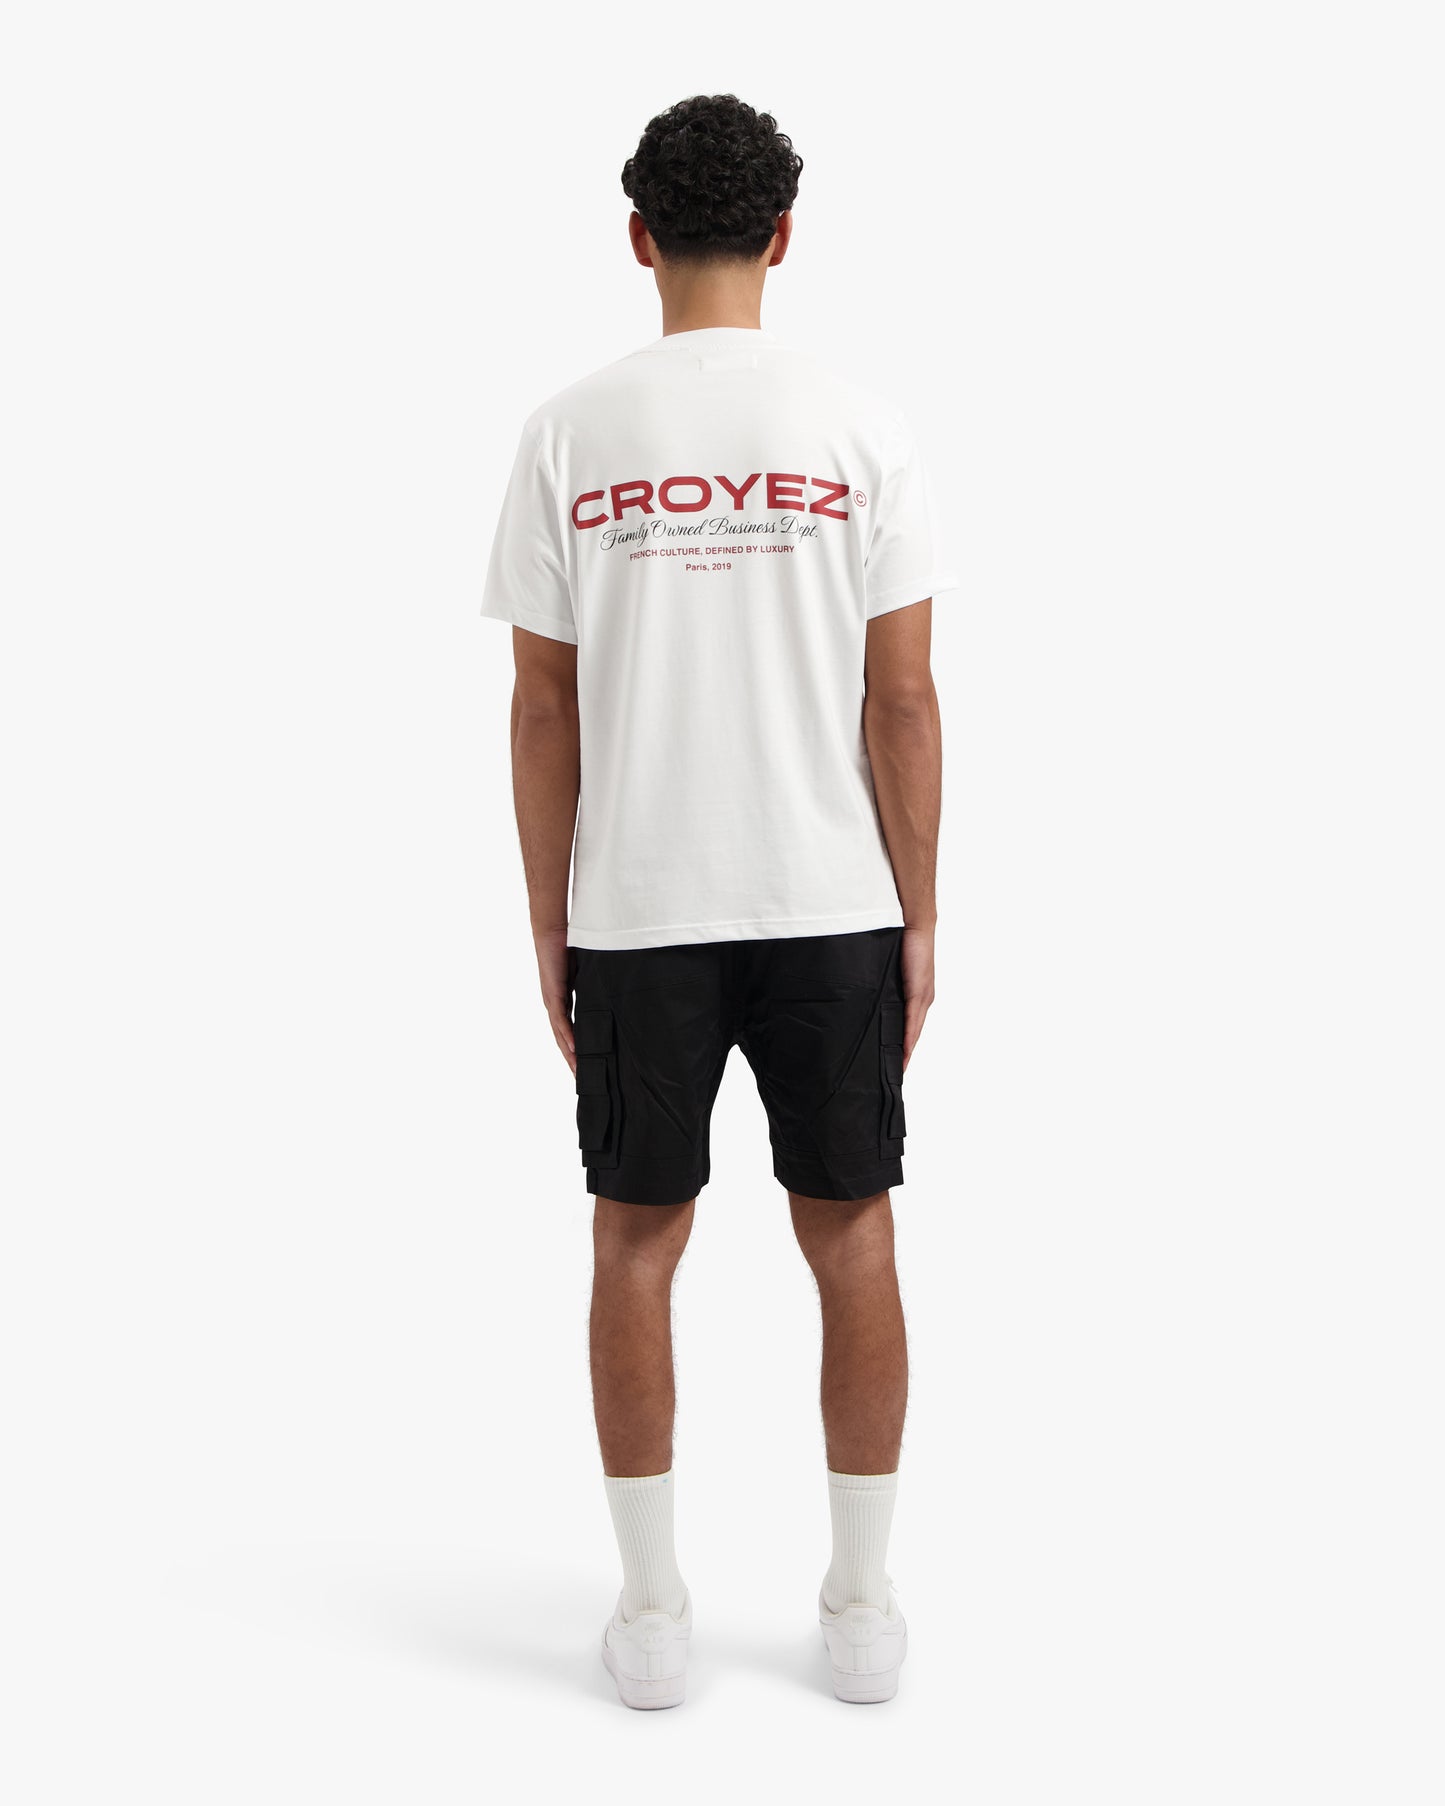 CROYEZ FAMILY OWNED BUSINESS T-SHIRT - WHITE/RED